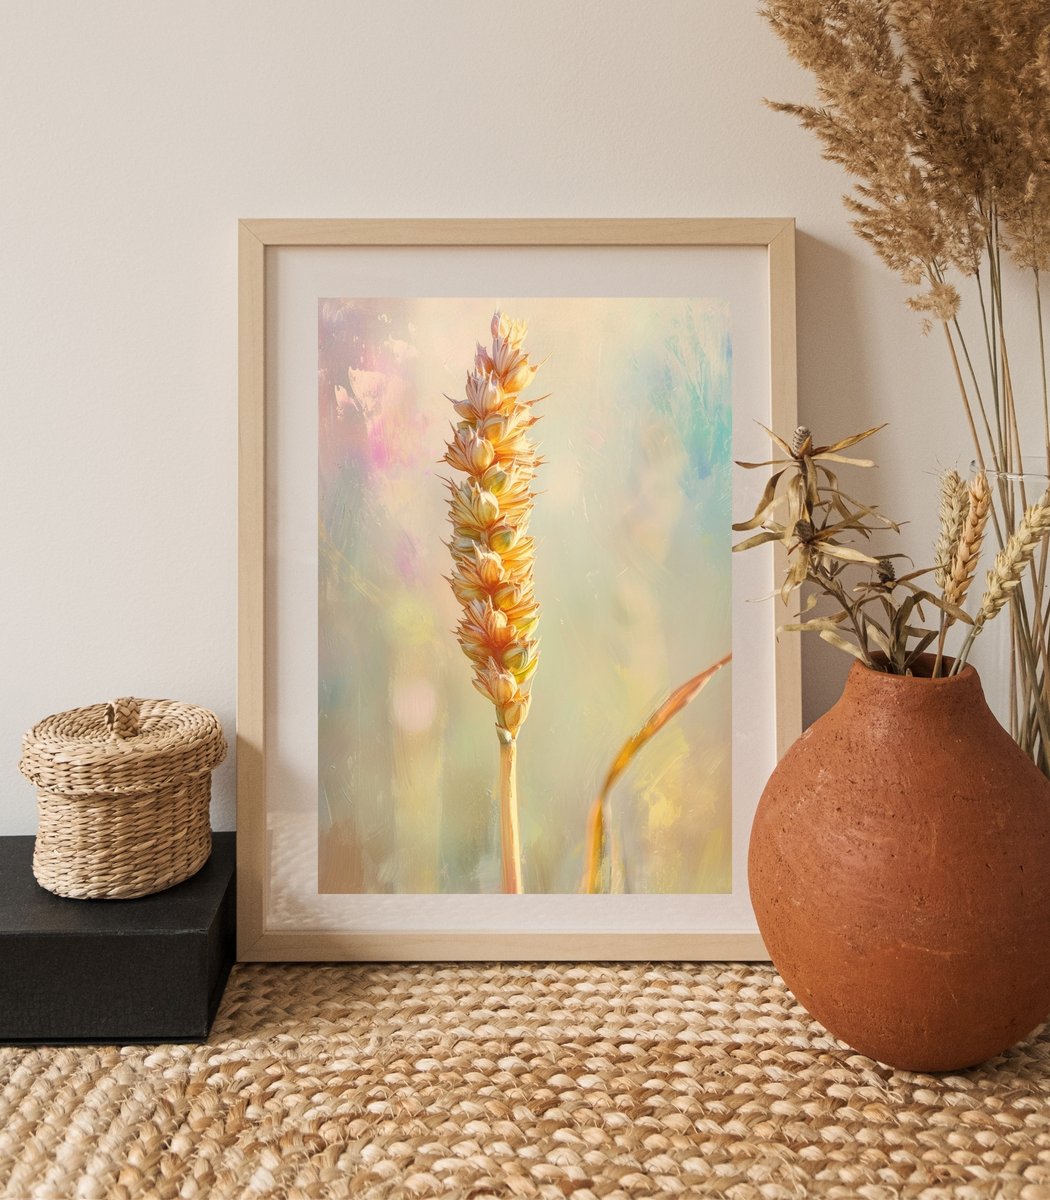 Let simplicity bloom on your wall with this graceful wheat stalk print from Lena Art Design. 🌾✨ A whisper of the harvest, captured in delicate hues. #SimpleElegance #HarvestArt #LenaArtDesign